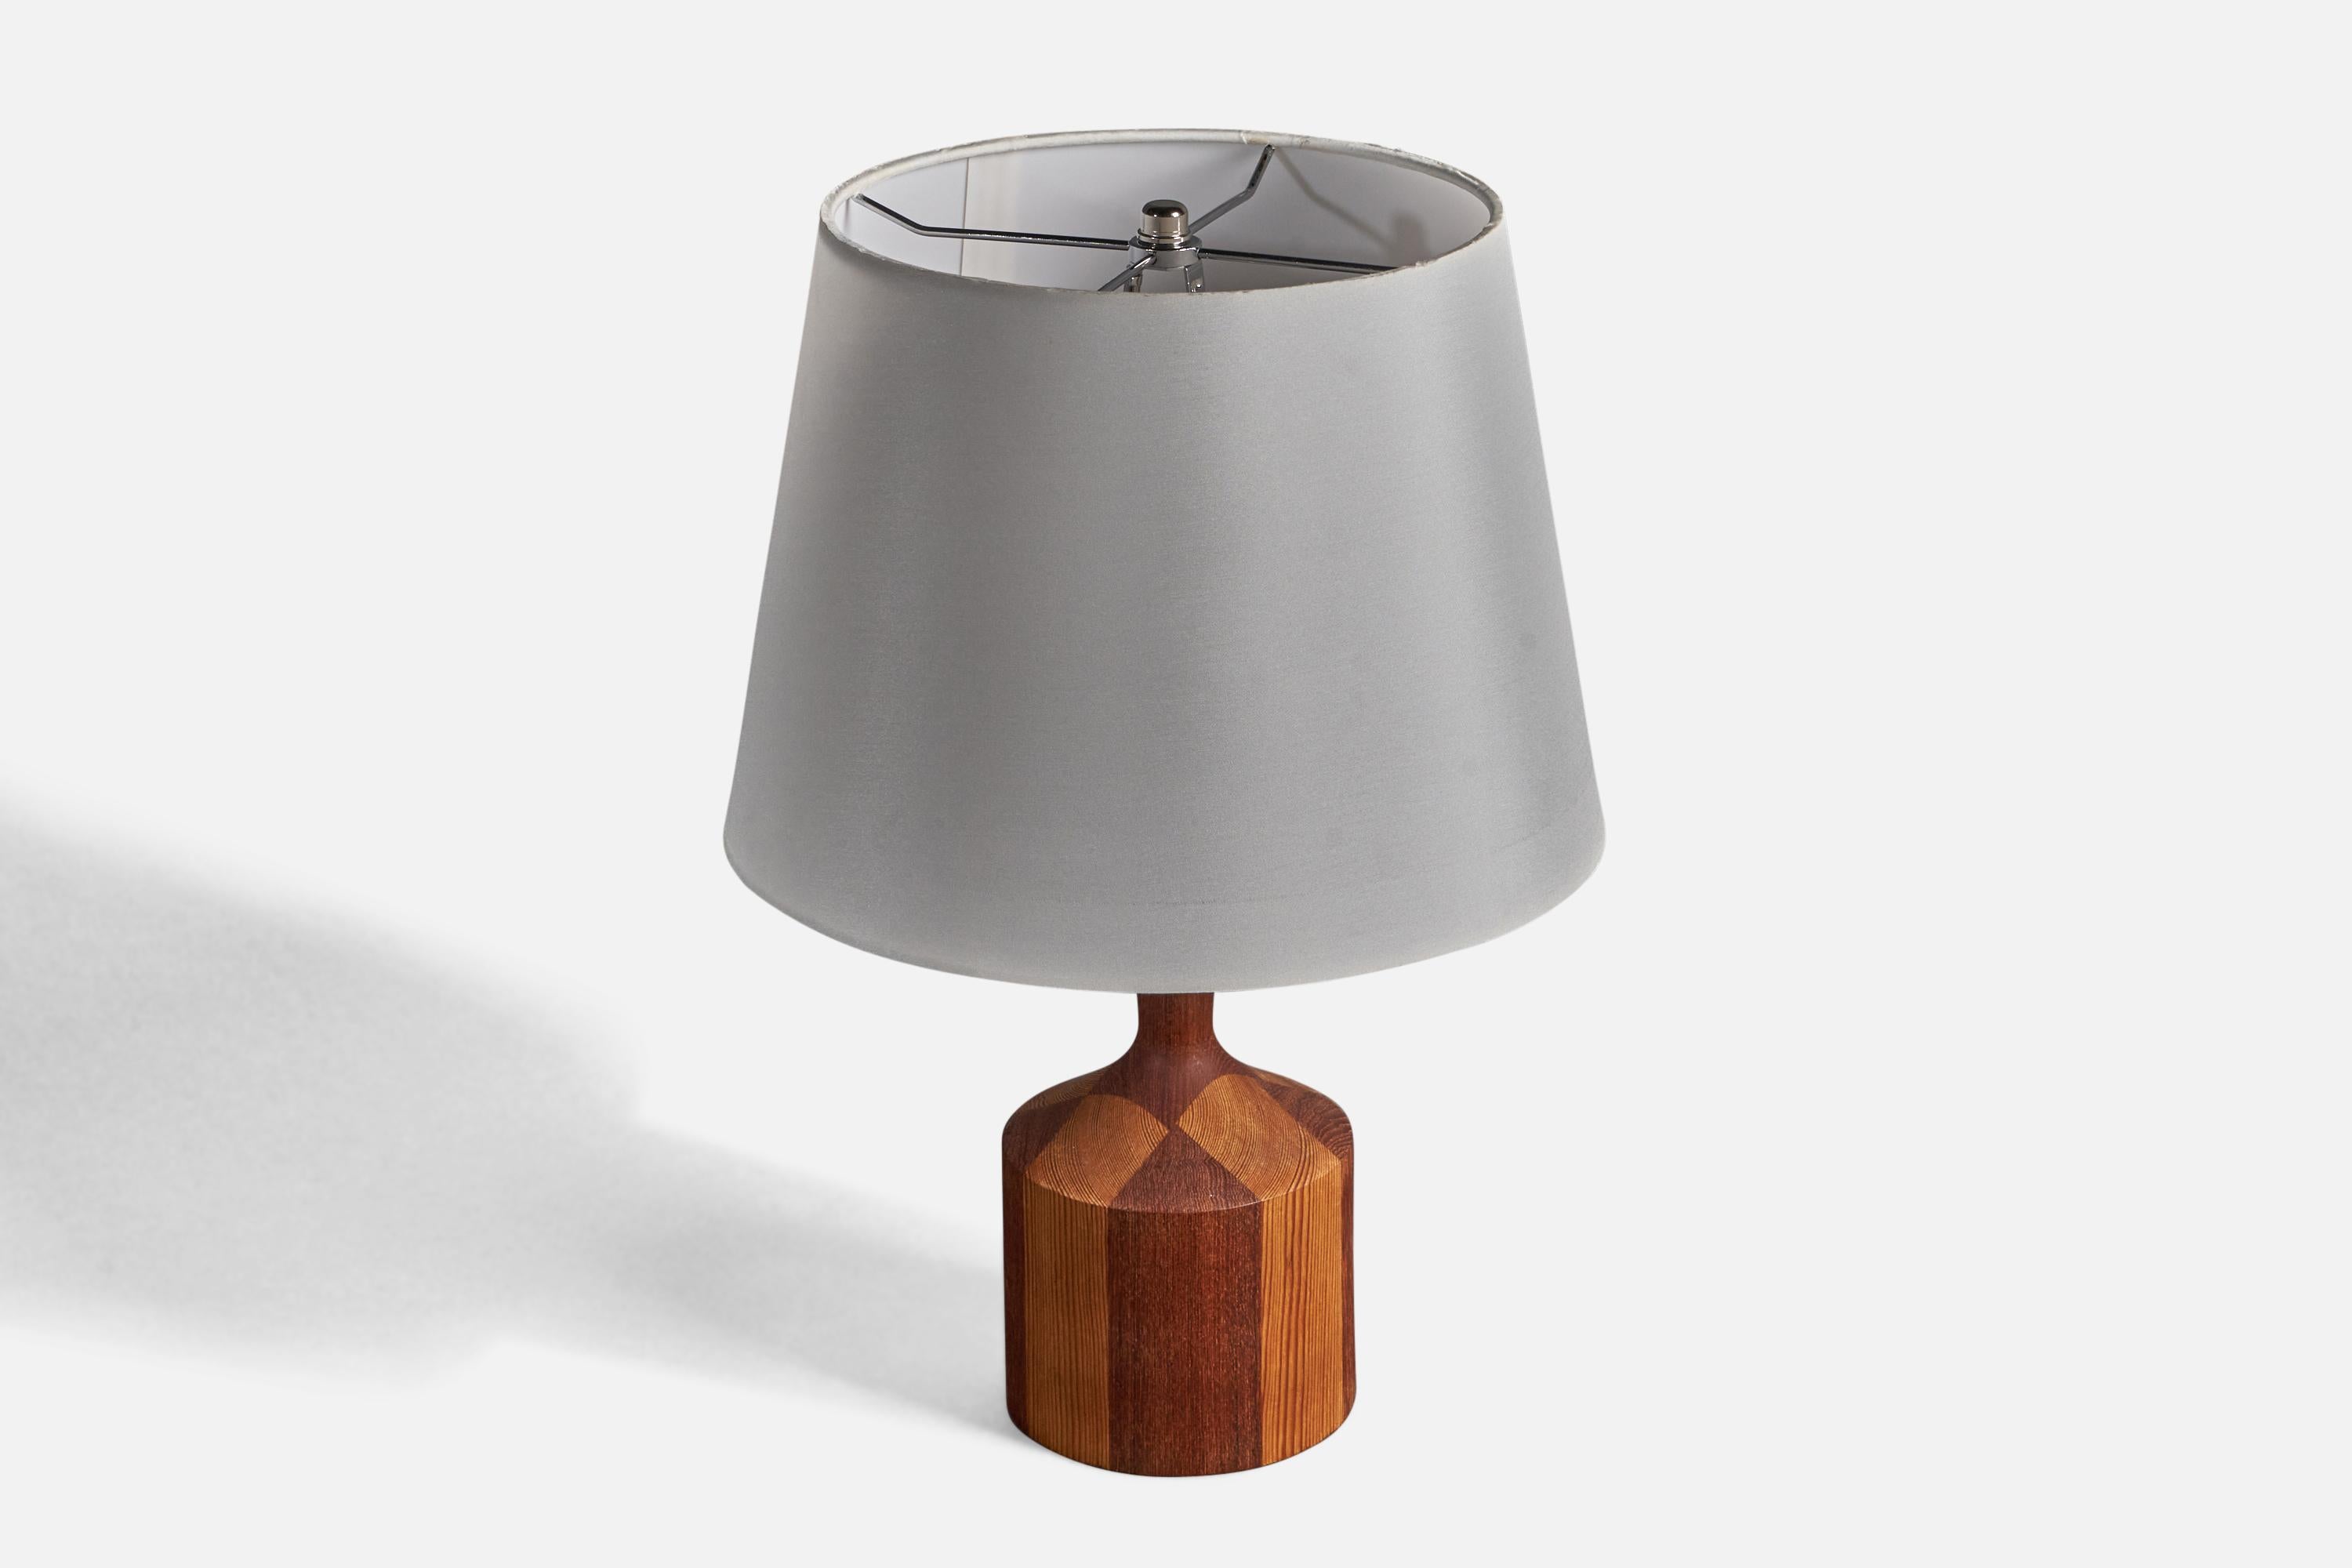 A table lamp. In solid teak and pine. 

Stated dimensions exclude lampshade. Height includes socket. Lampshade is not included in purchase.

Other designers of the period include Finn Juhl, Hans Wegner, Kaare Klint, Alvar Aalto, and Paavo Tynell.